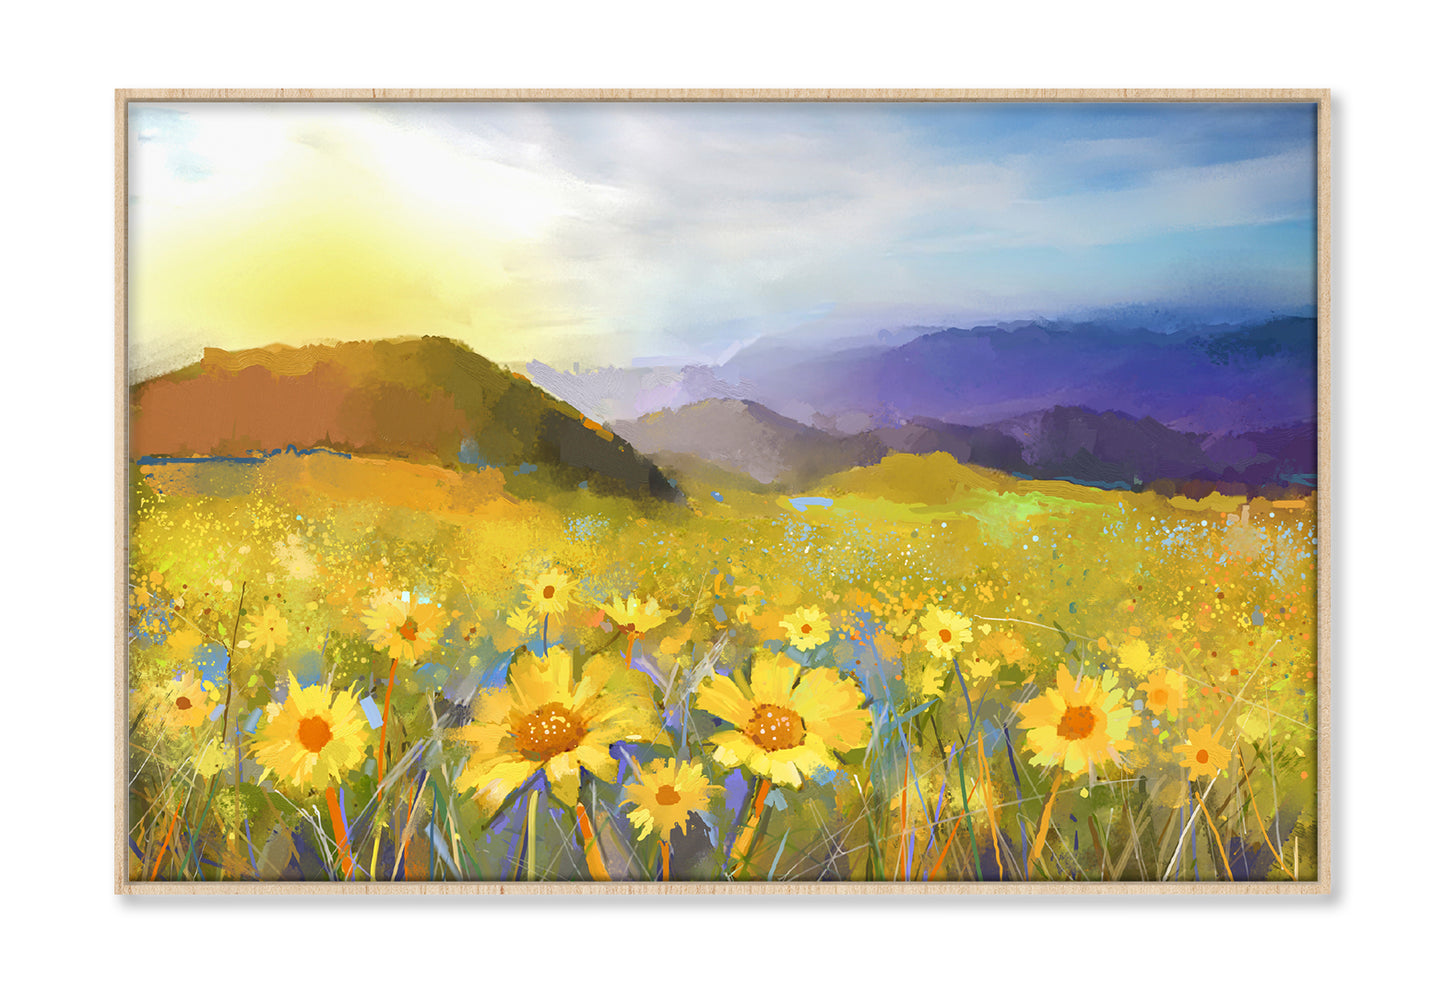 Daisy Flower Blossom, Warm Light Of The Sunset & Hill Oil Painting Limited Edition High Quality Print Canvas Box Framed Natural